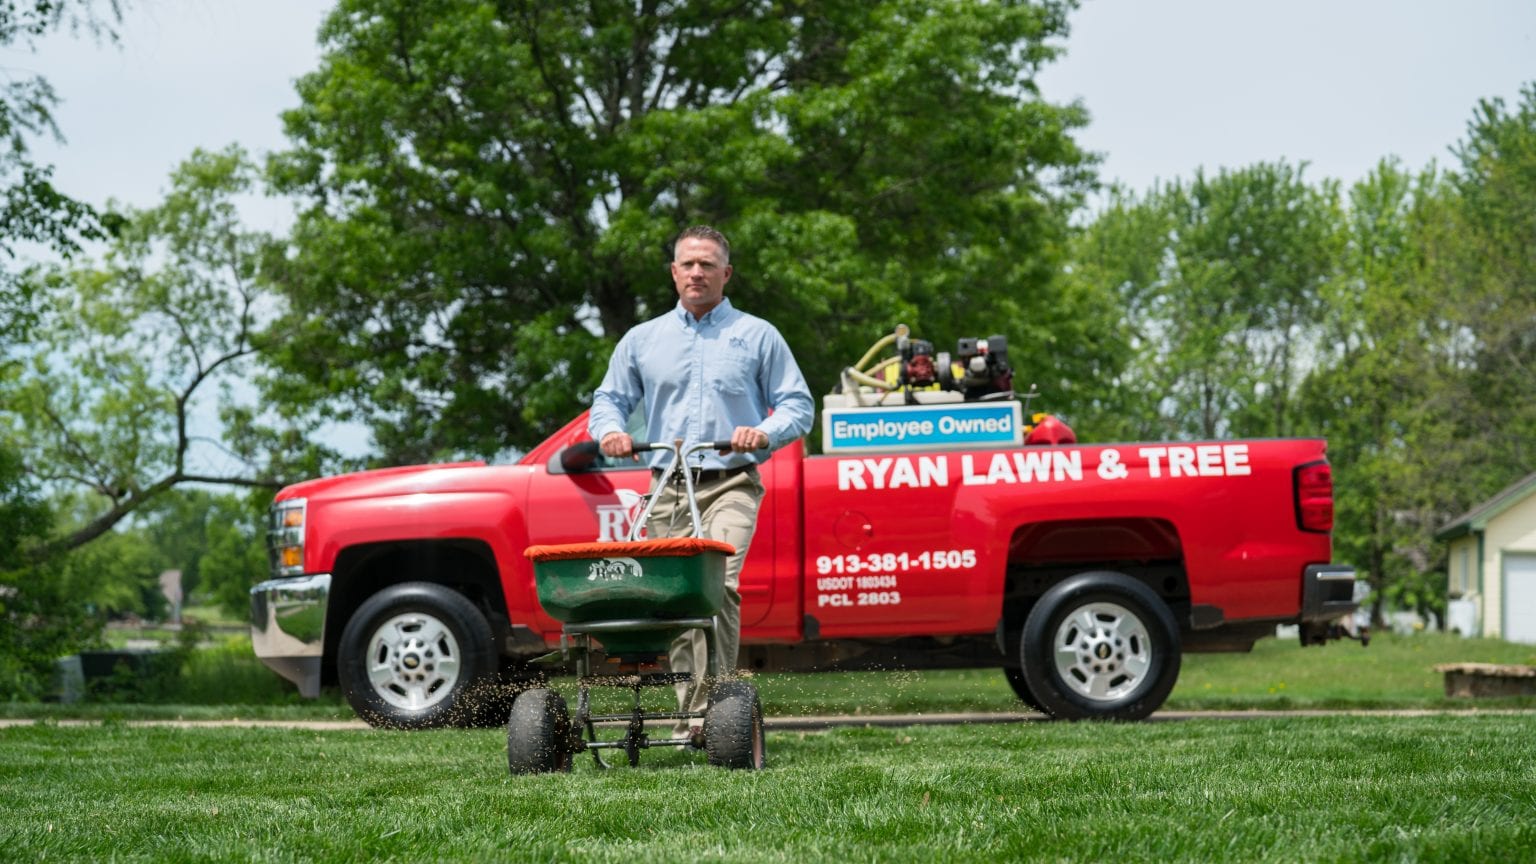 Best Lawn Care Service Near Me | Call The Pros At Ryan Lawn & Tree